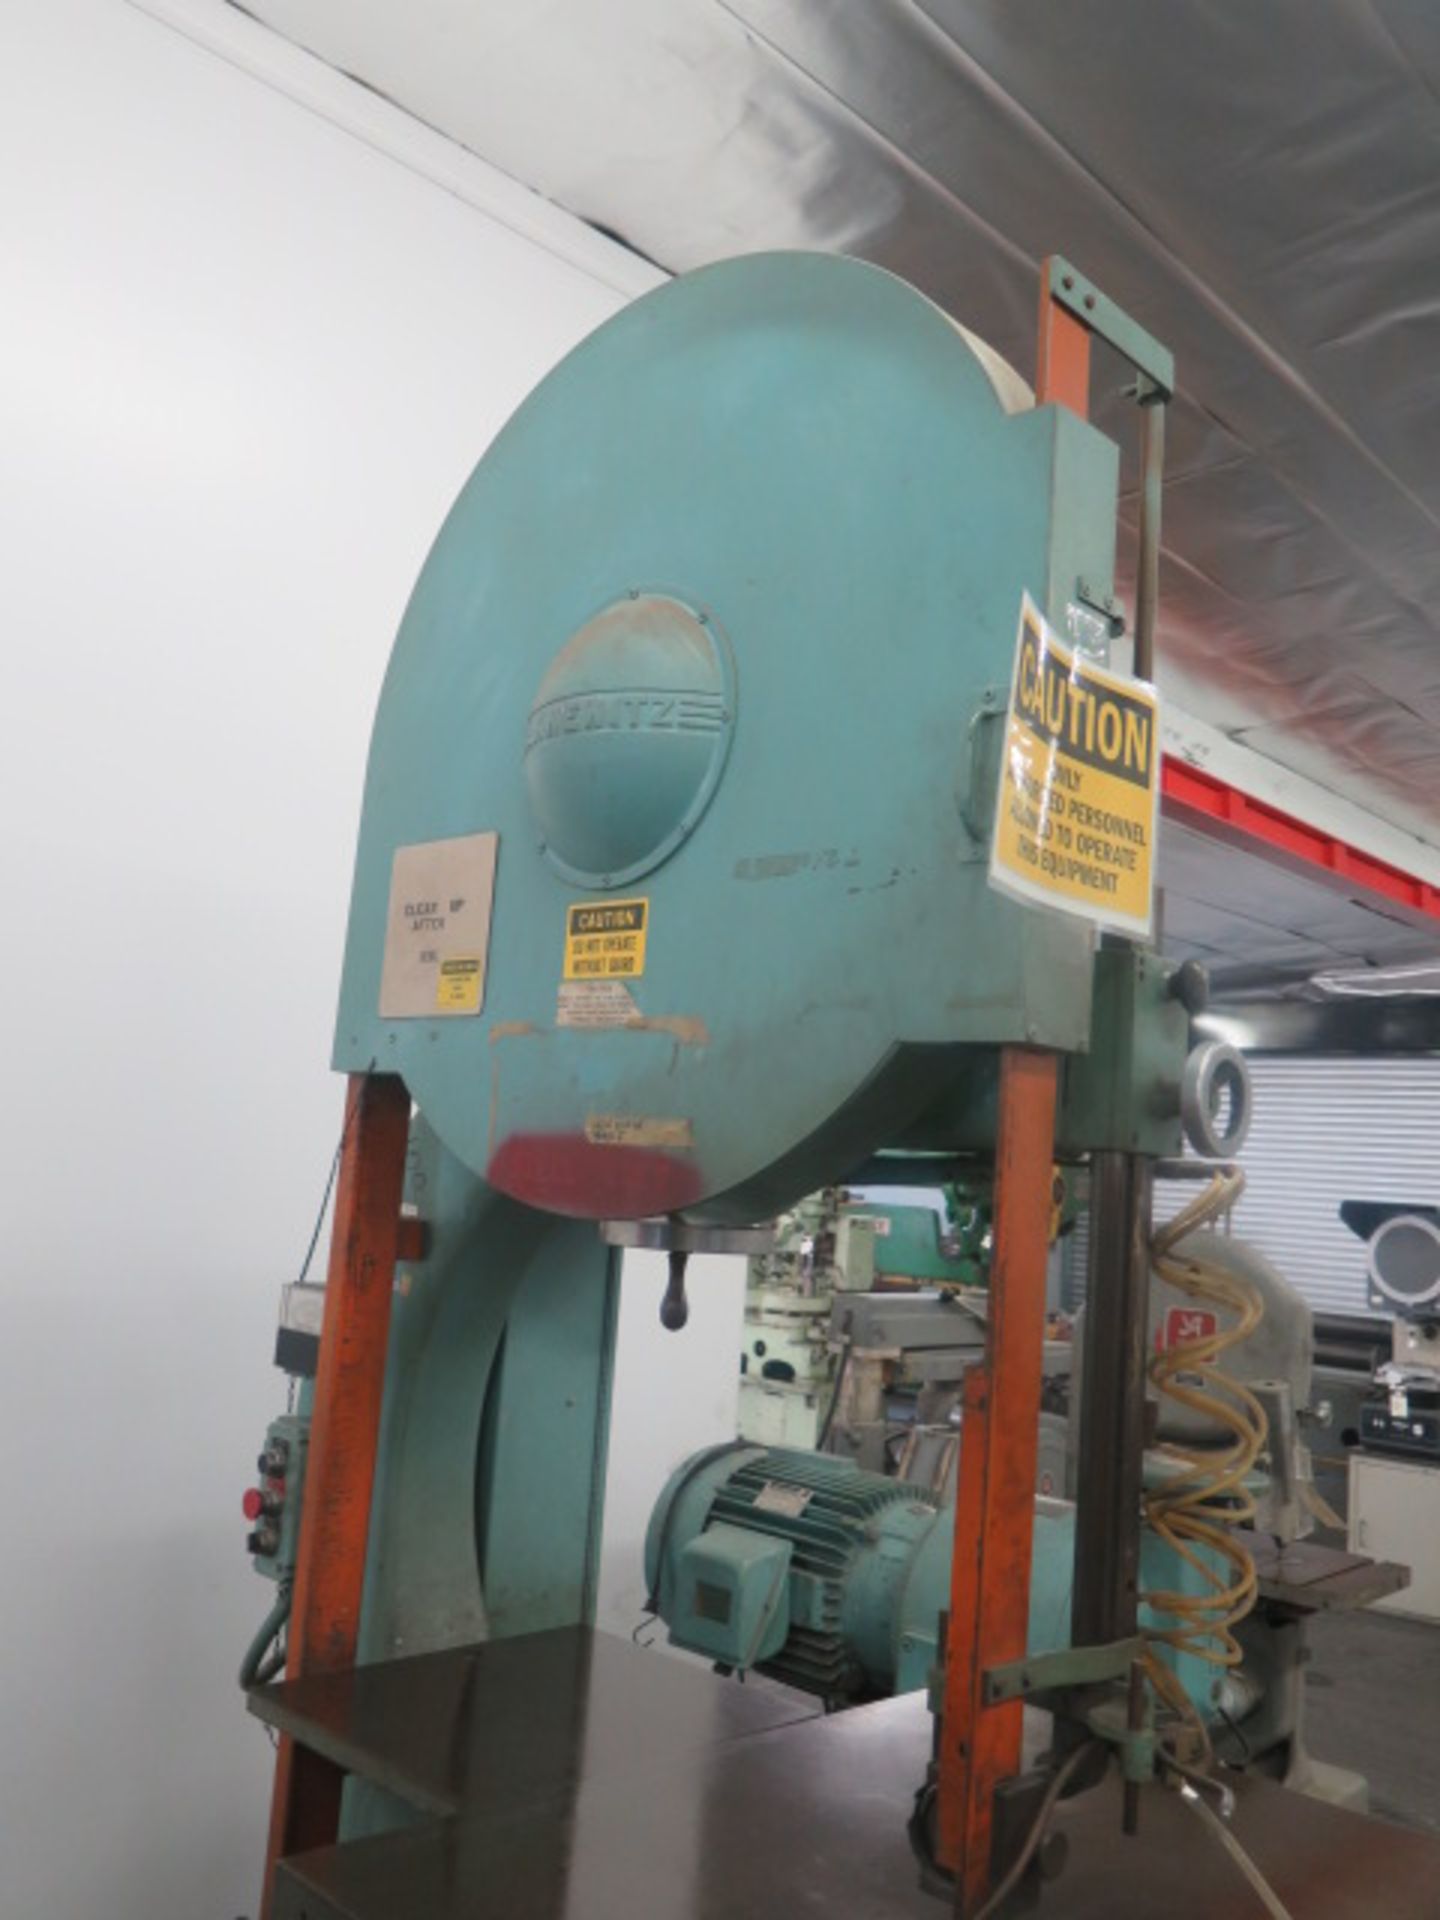 Tannewitz mdl. 6V1E 35” Vertical Band Saw s/n 83041 w/ Reeves Vari-Drive Speed Controller - Image 2 of 8